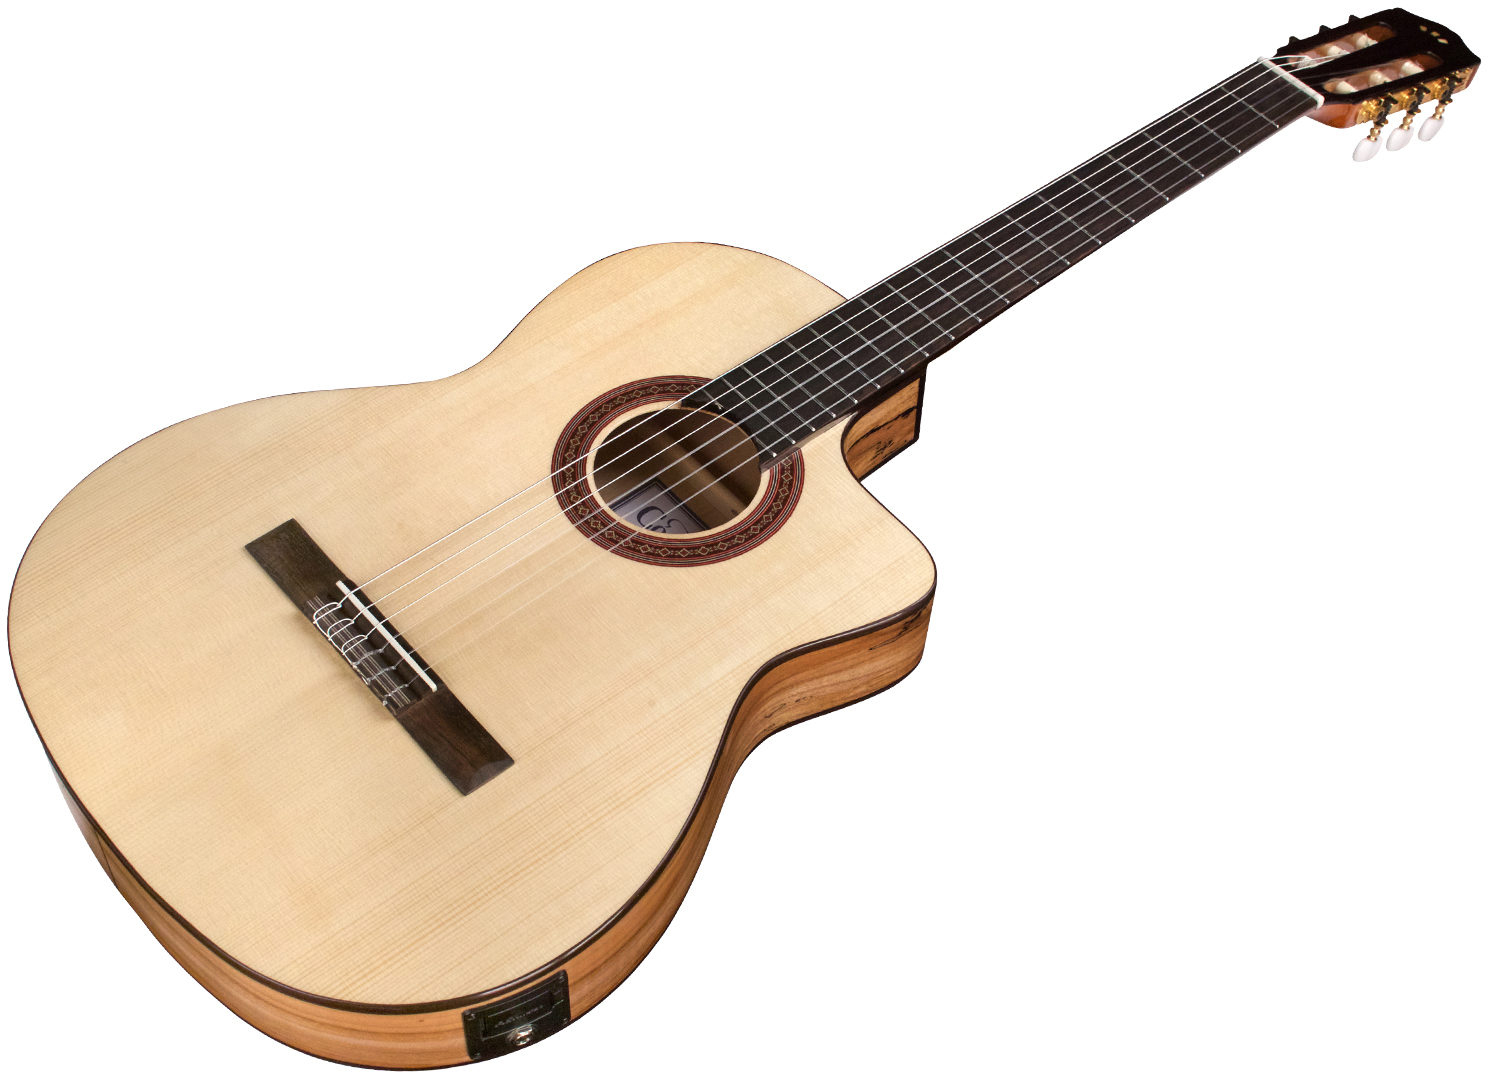 Cordoba C5 Cet Spalted Maple Limited Thinbody Cw Epicea Erable Pf - Natural - Classical guitar 4/4 size - Variation 2